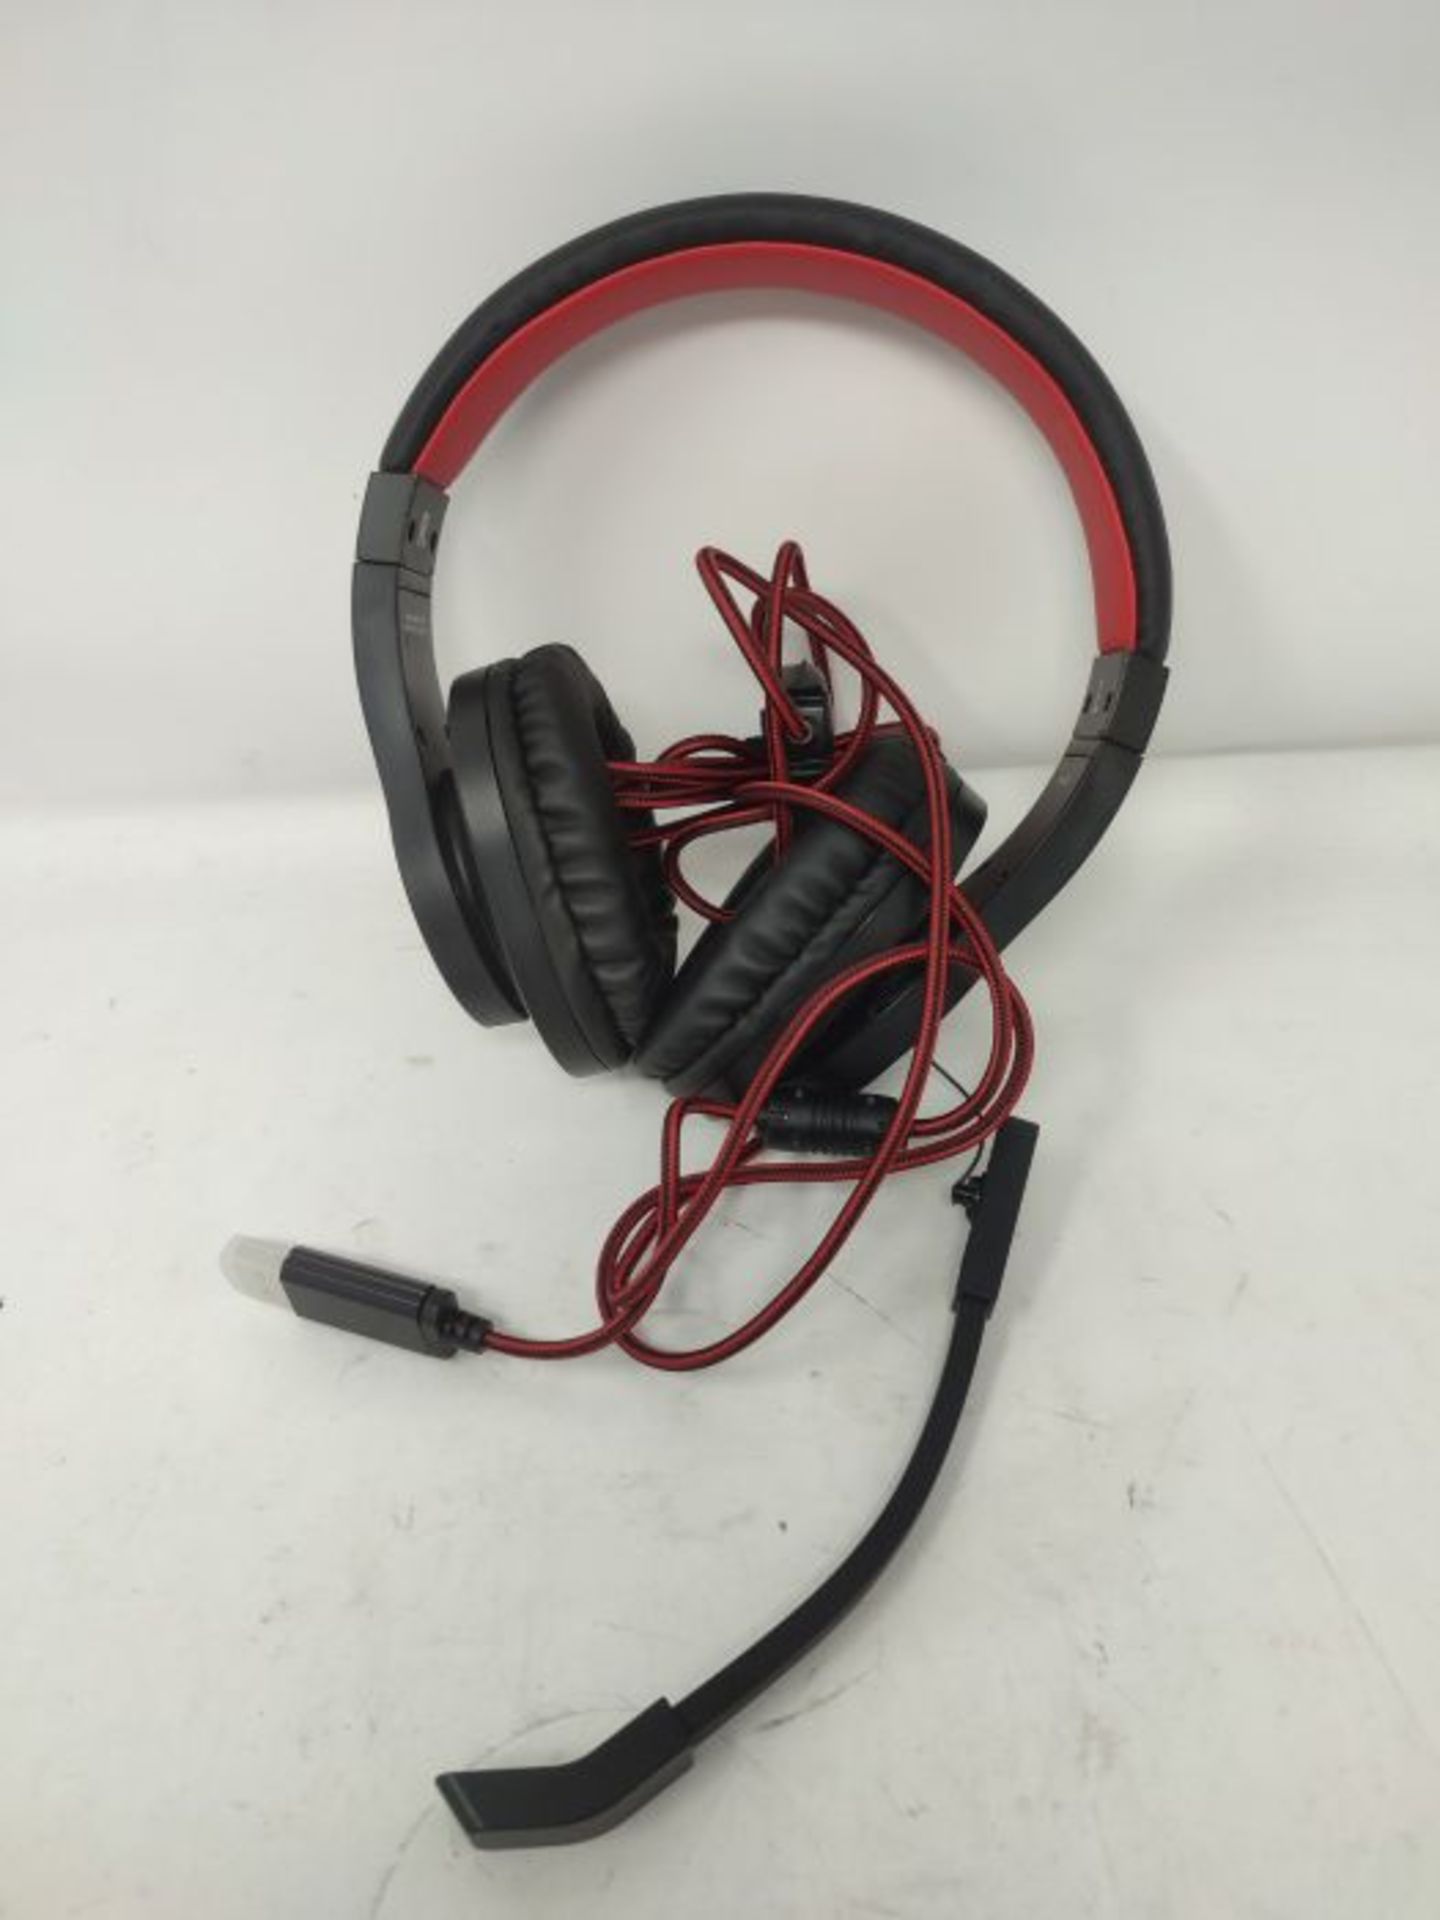 Hama USB Headset, Over Ear Headphones with Microphone (Headset with Volume Control and - Image 3 of 3